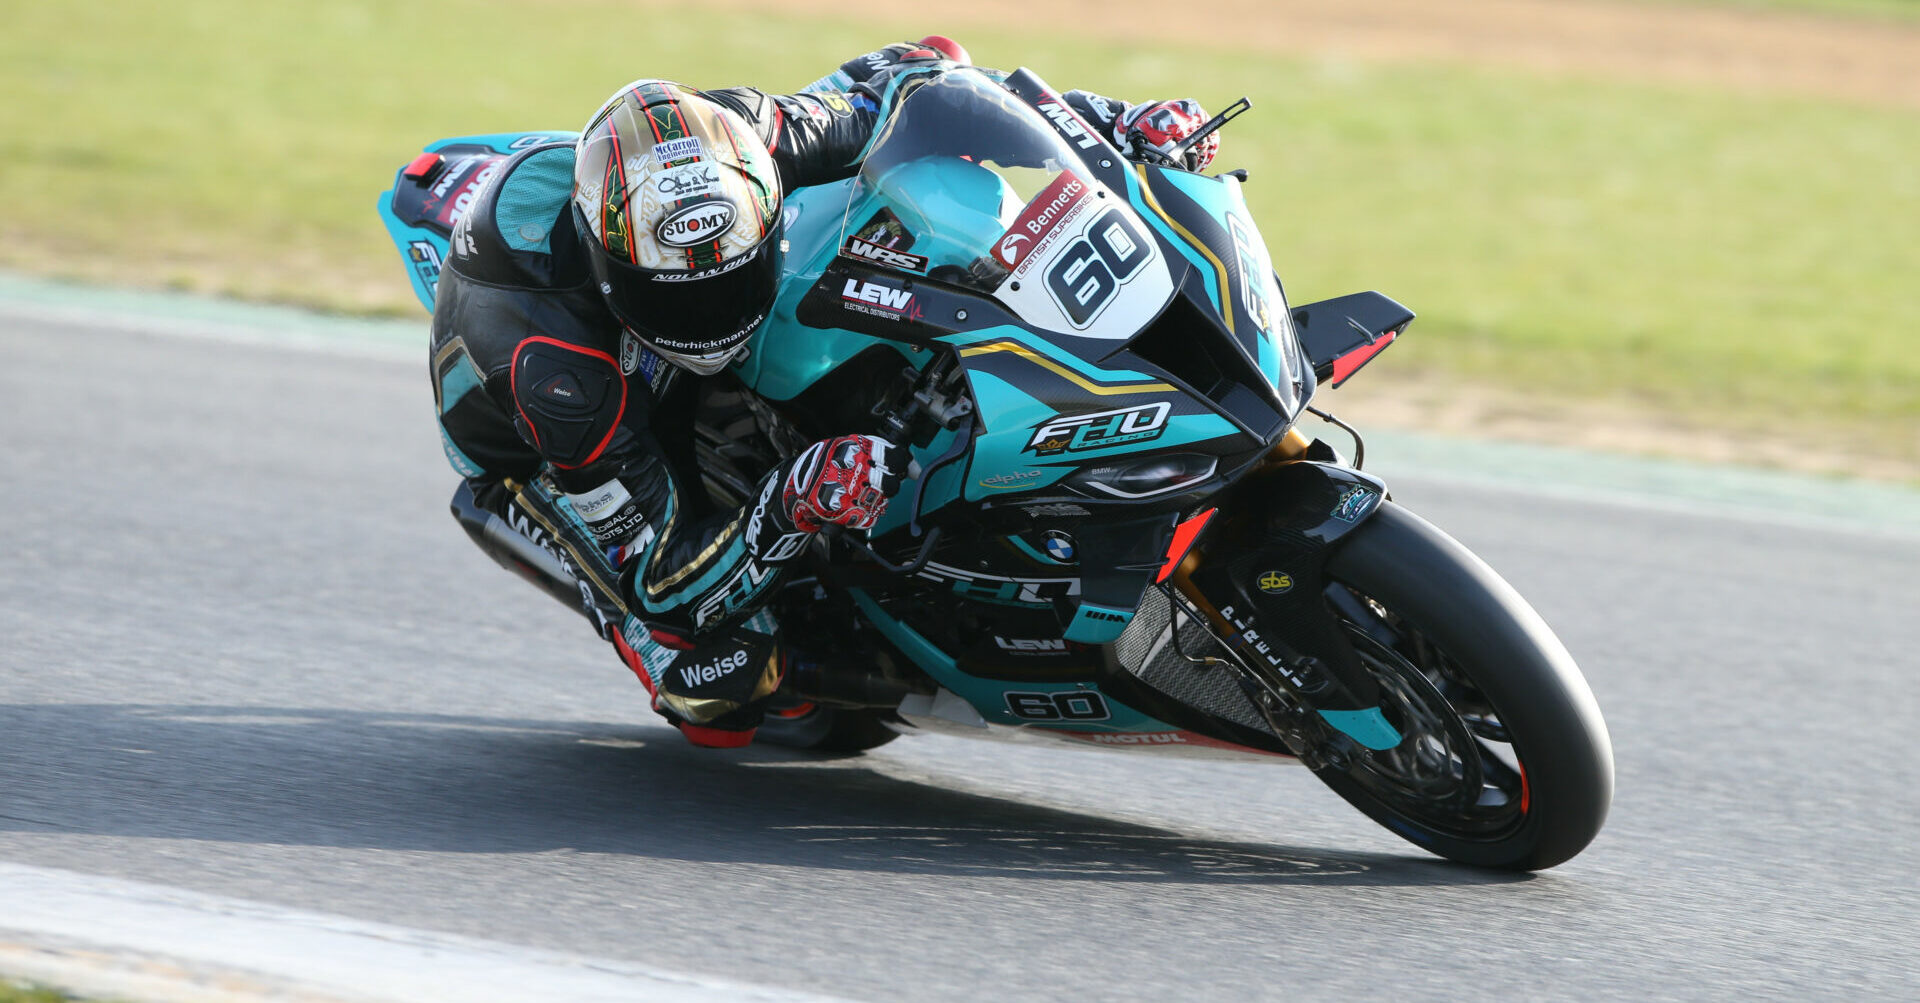 Peter Hickman (60) testing at Snetterton. Photo courtesy FHO Racing.